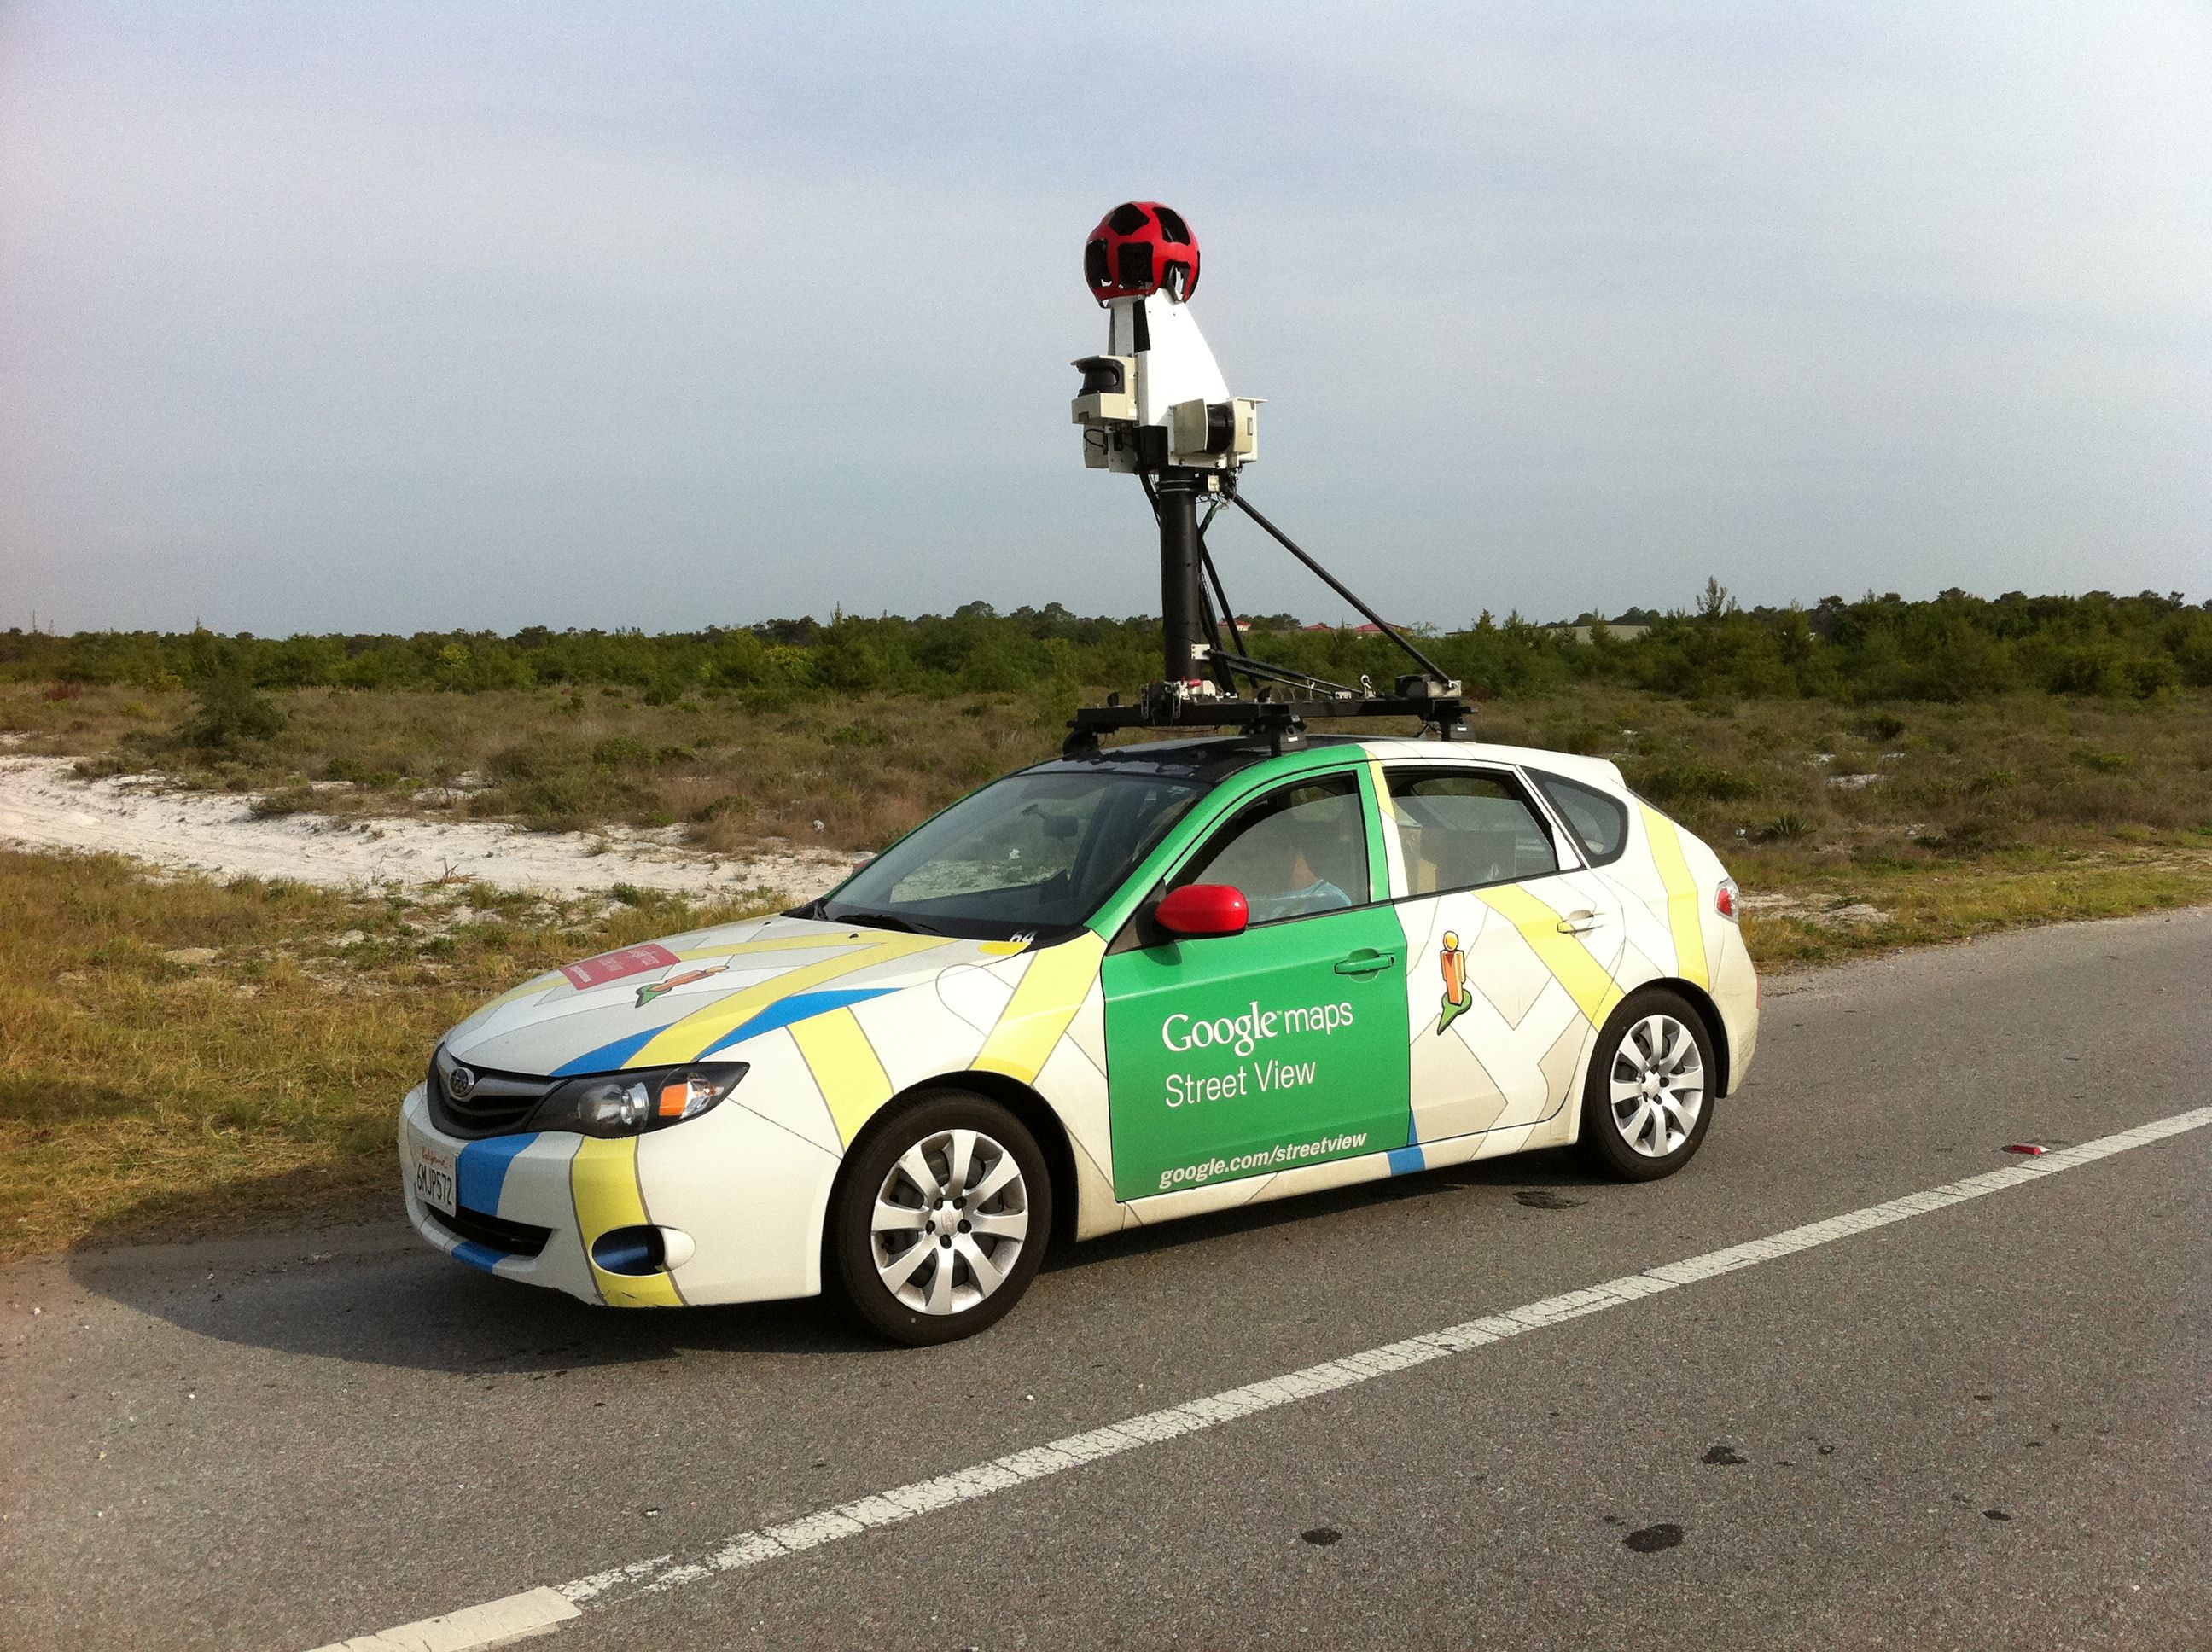 A Google Street View vehicle on the side of the road in a rural area.